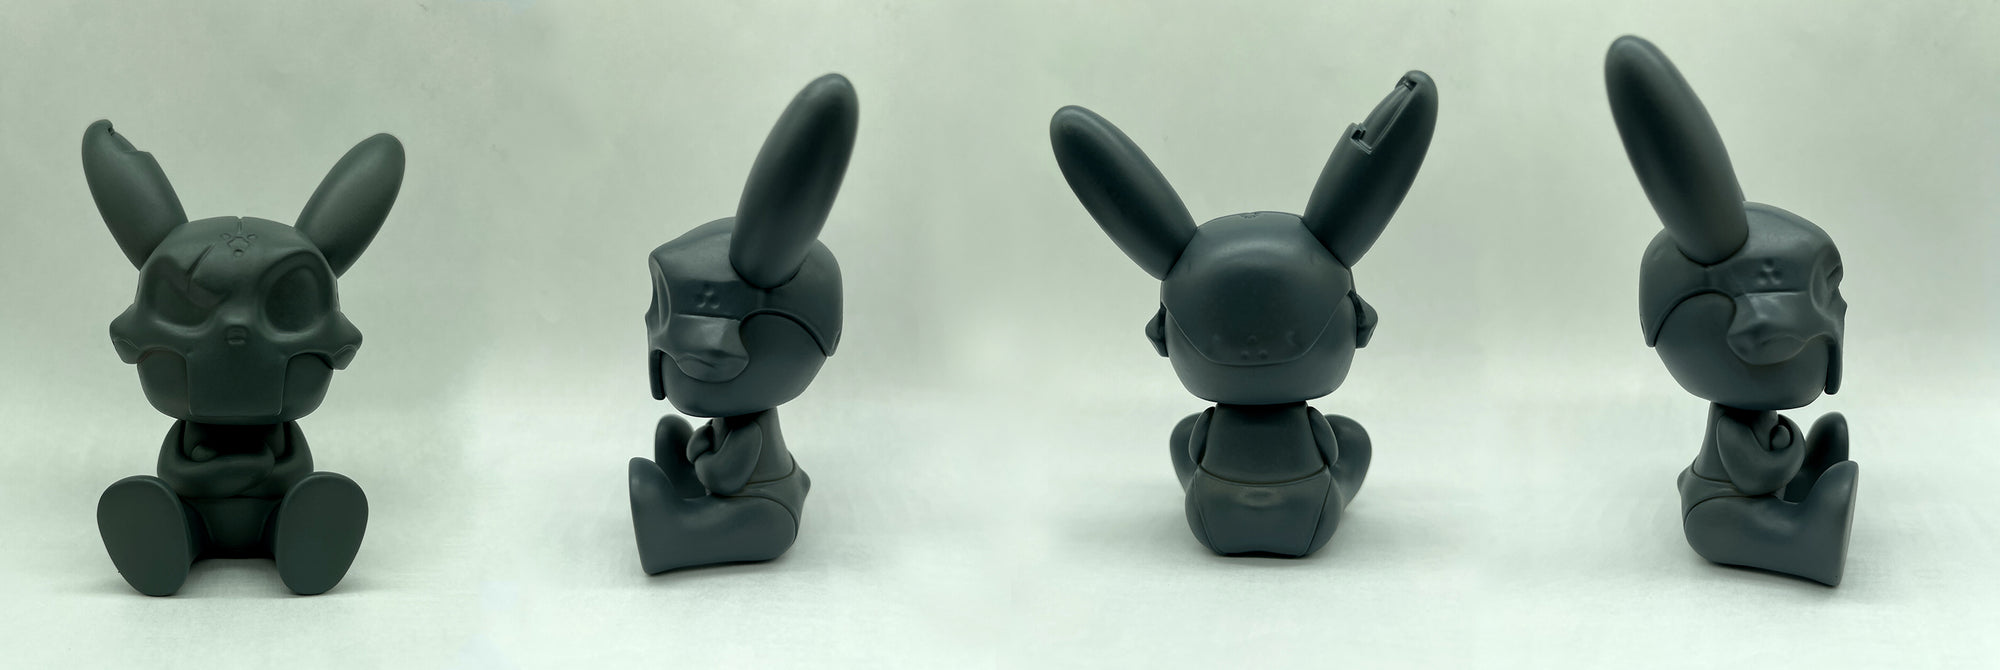 3.5 inch RabbotZ mold finished and to be produced after 2-month hard work